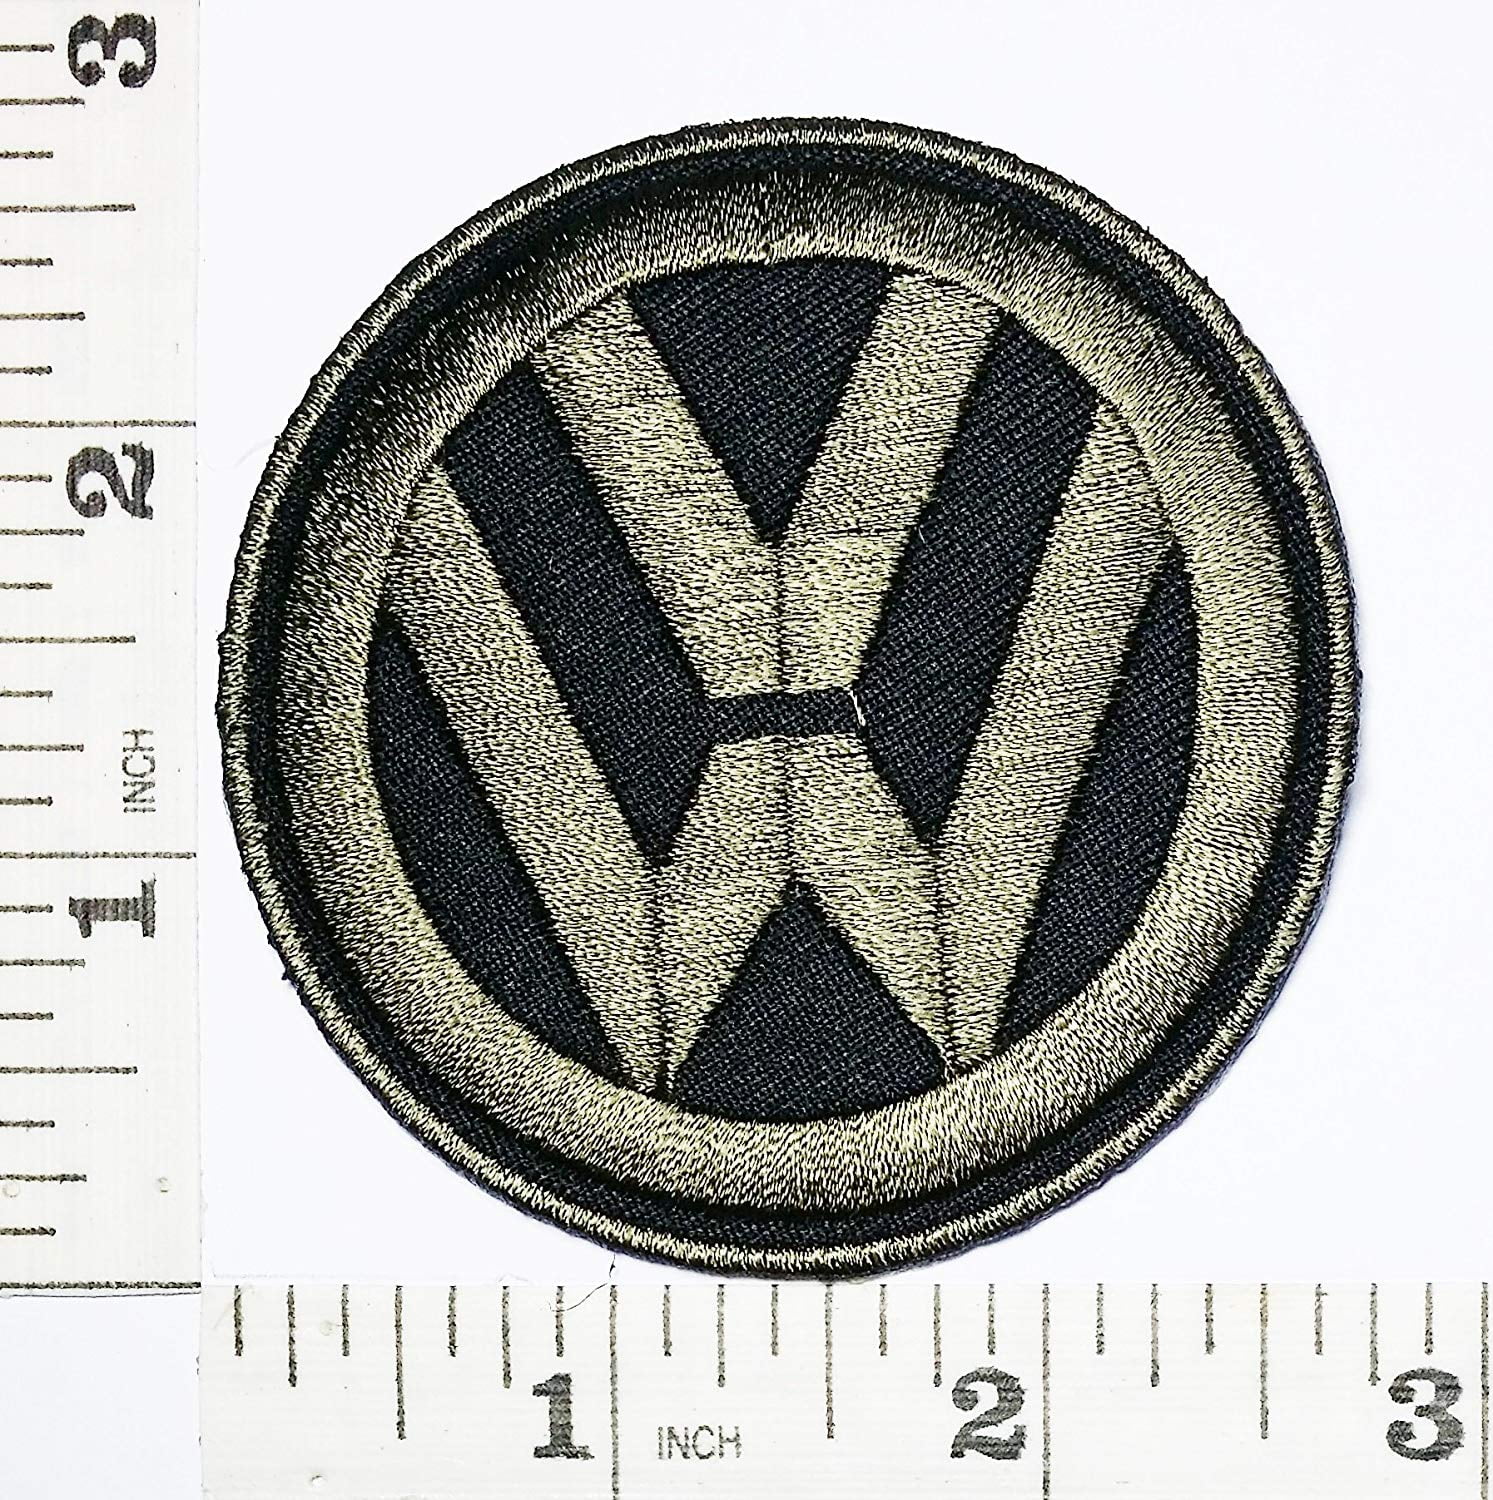 MERCEDES BENZ  Iron-On/Sew-On Embroidered Patch Fancy Dress Jacket T-Shirt Badge 